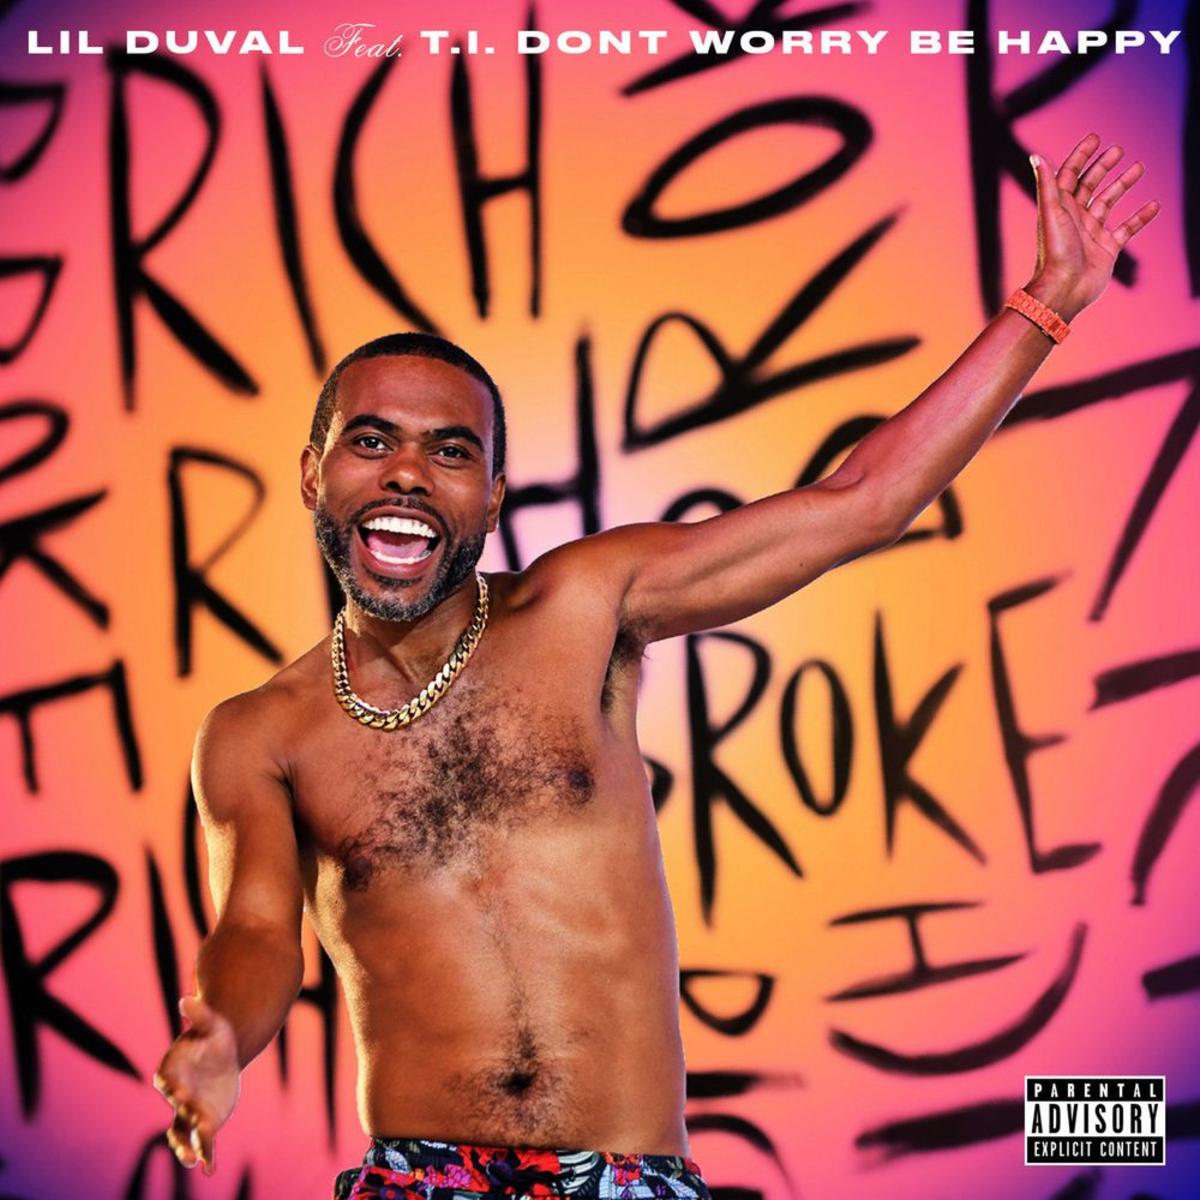 Lil Duval & T.I. Tell The World “Don’t Worry Be Happy”